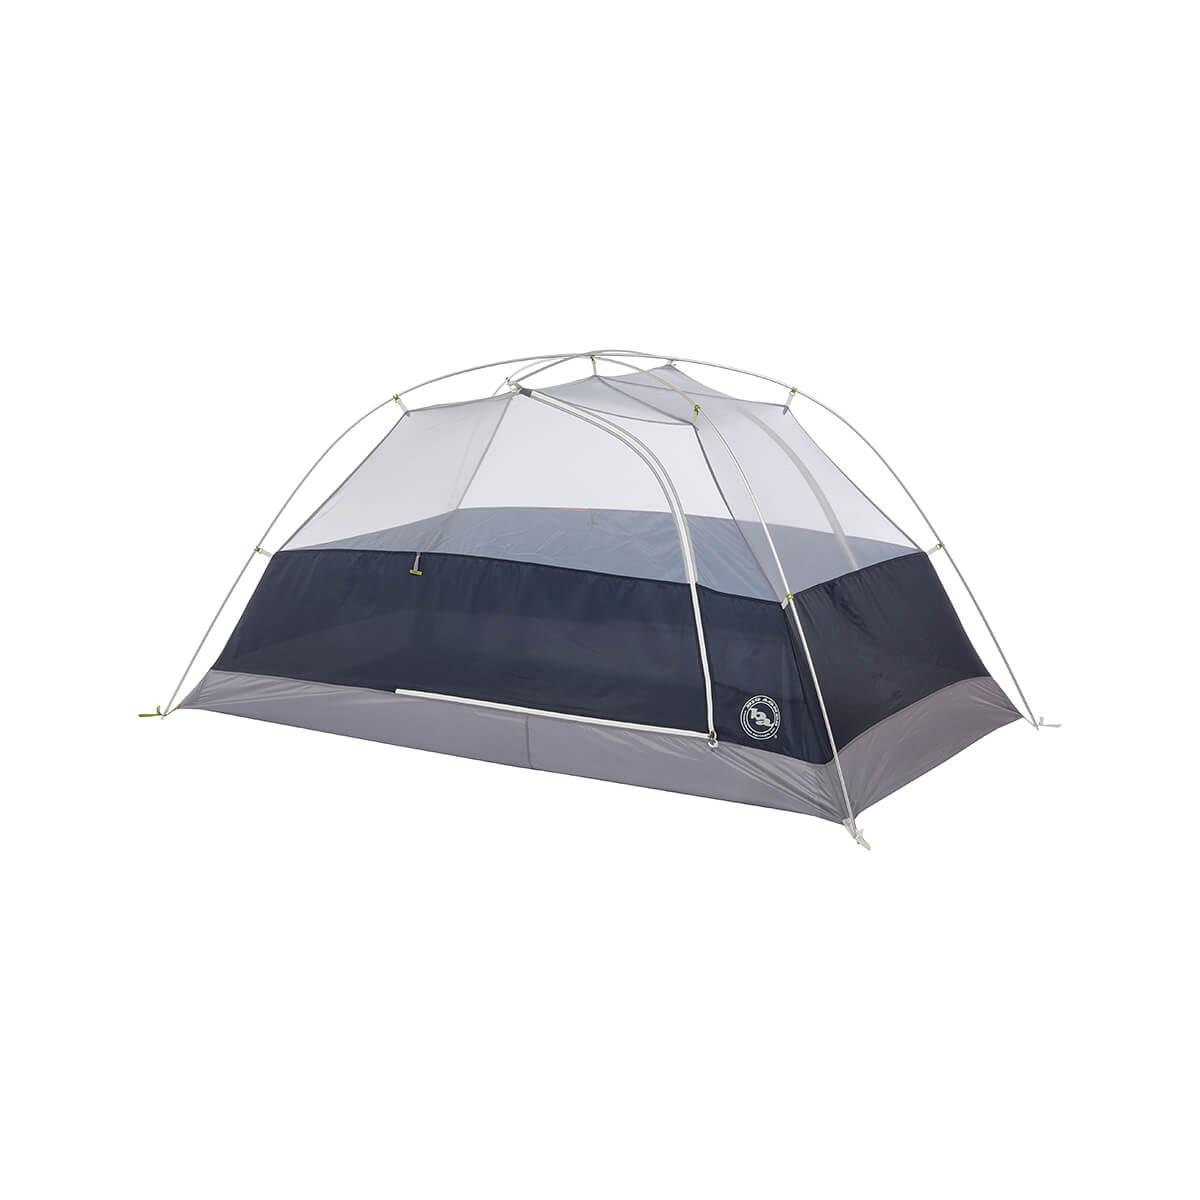  Blacktail Tent - 2- Person